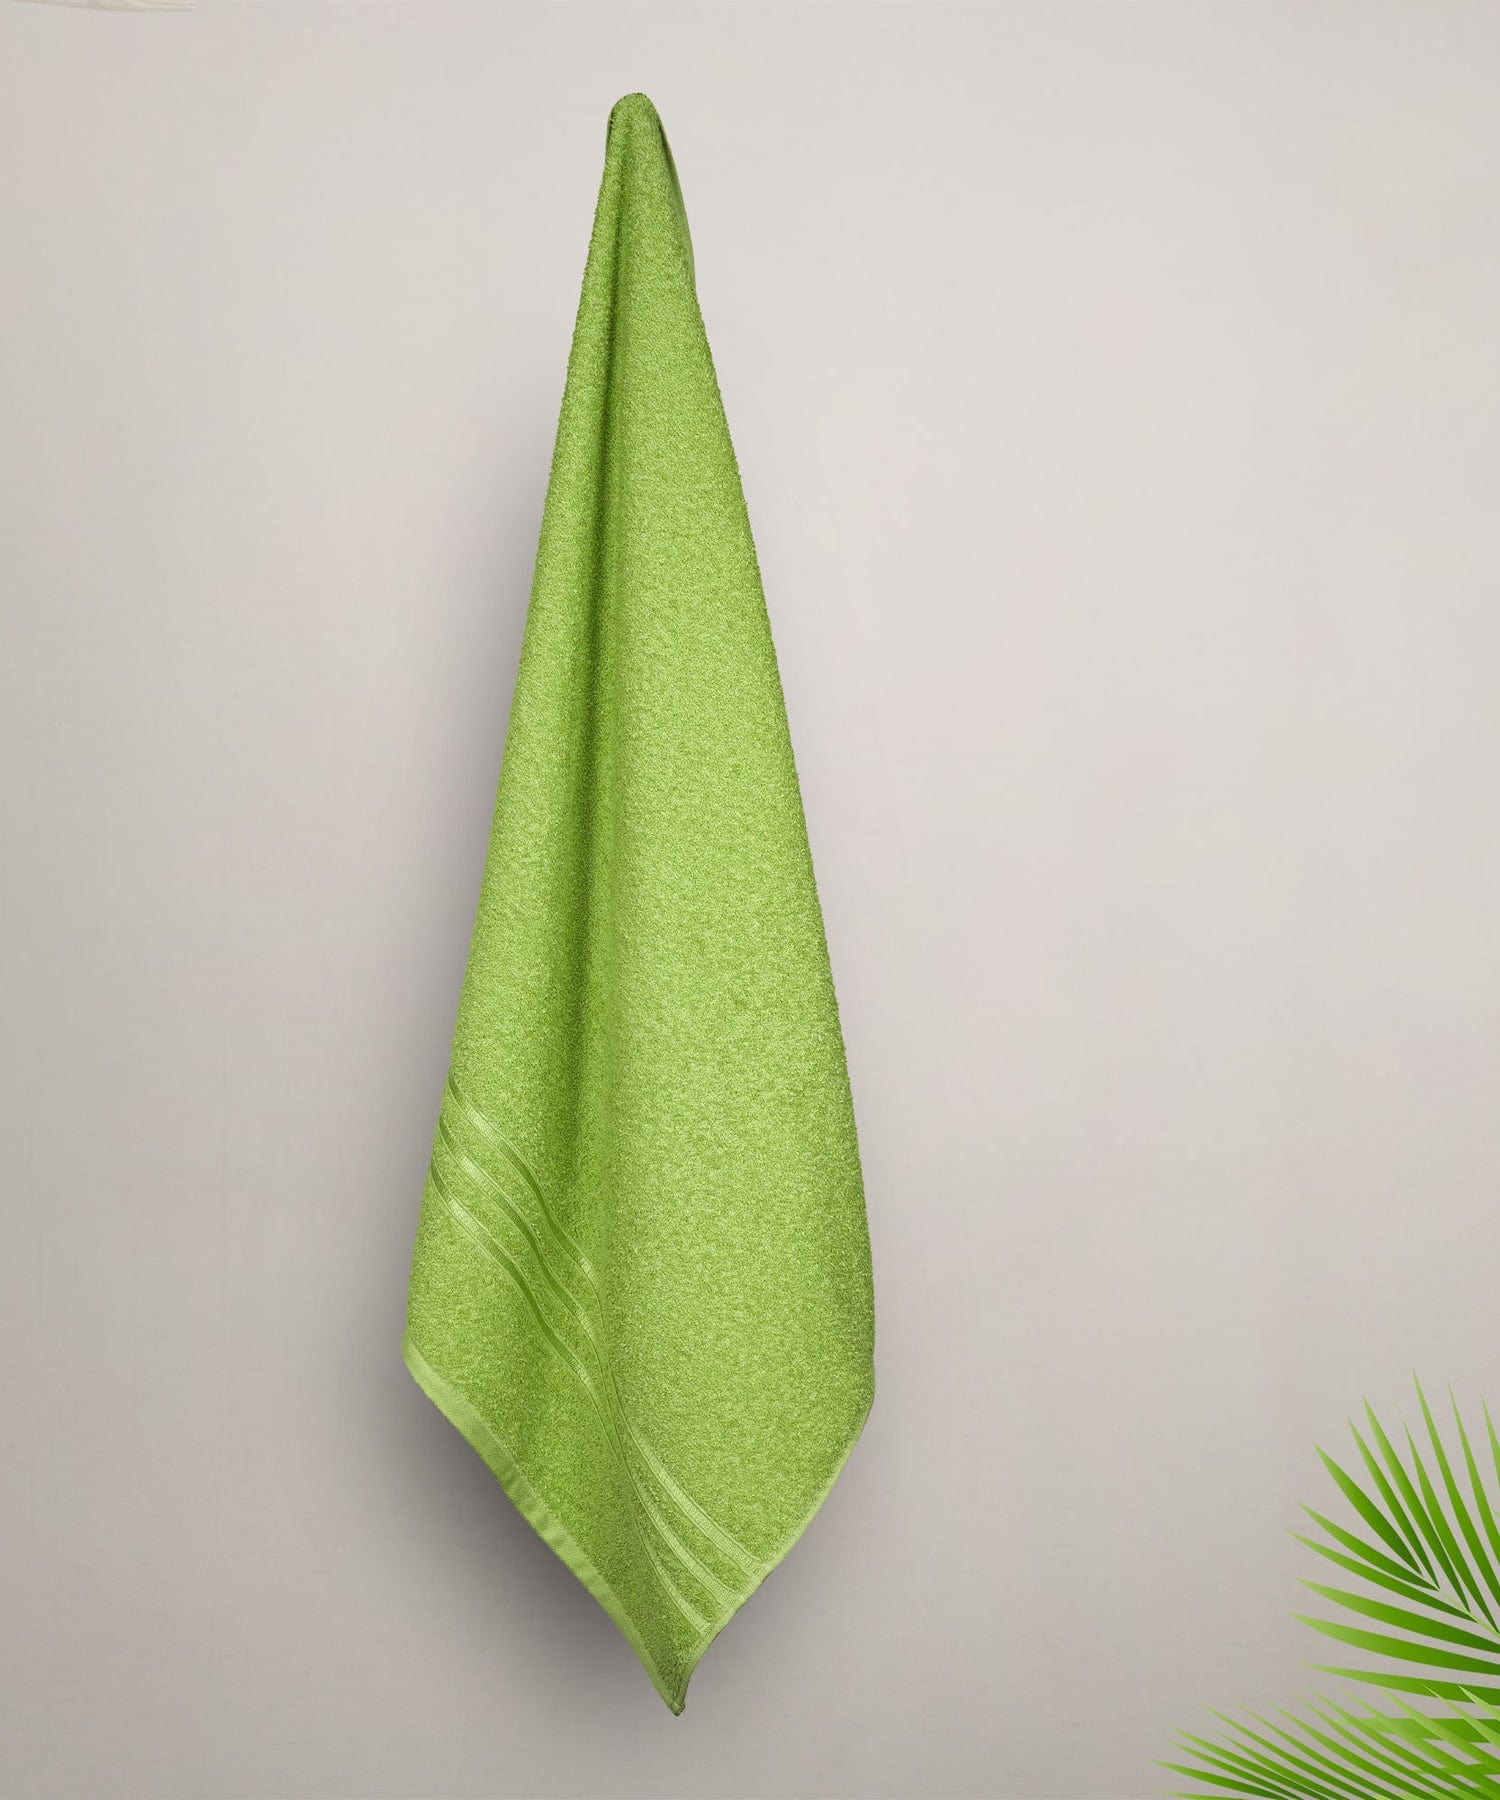 COMFORT LIVING TOWELS,100% Cotton,Quicky Dry,Light Weight, LIME GREEN